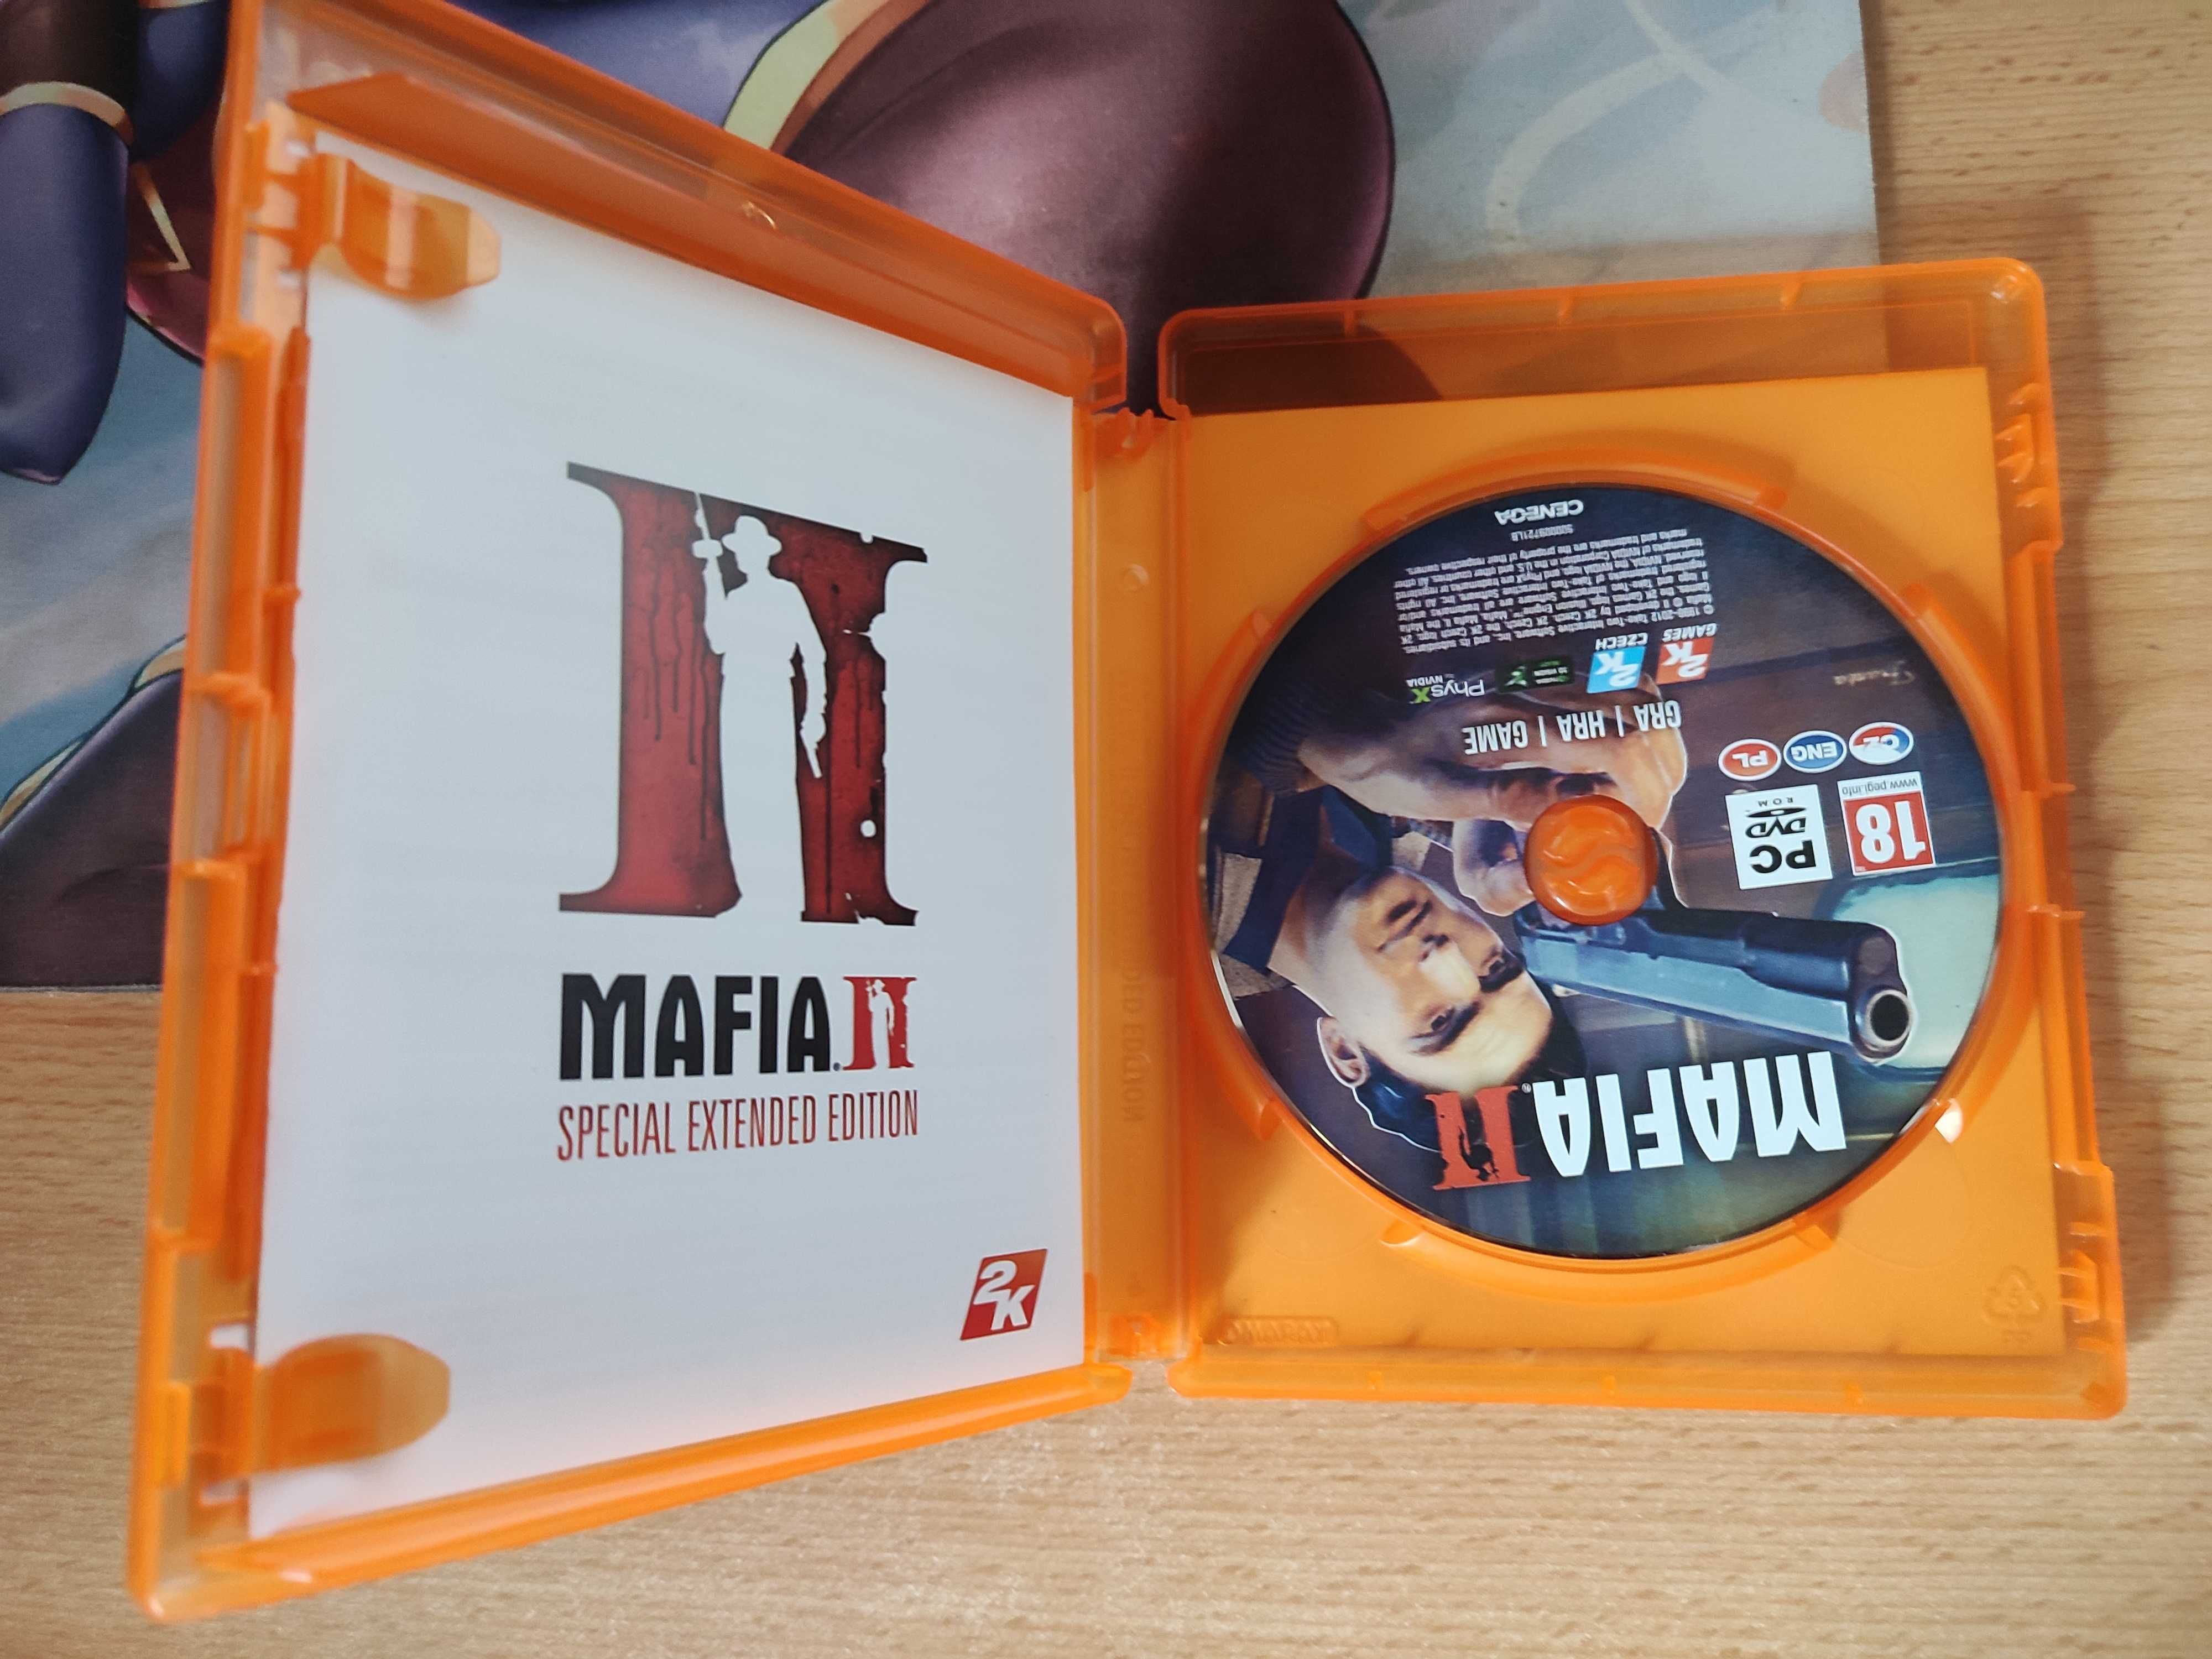 Mafia 2 Special Extended Edition